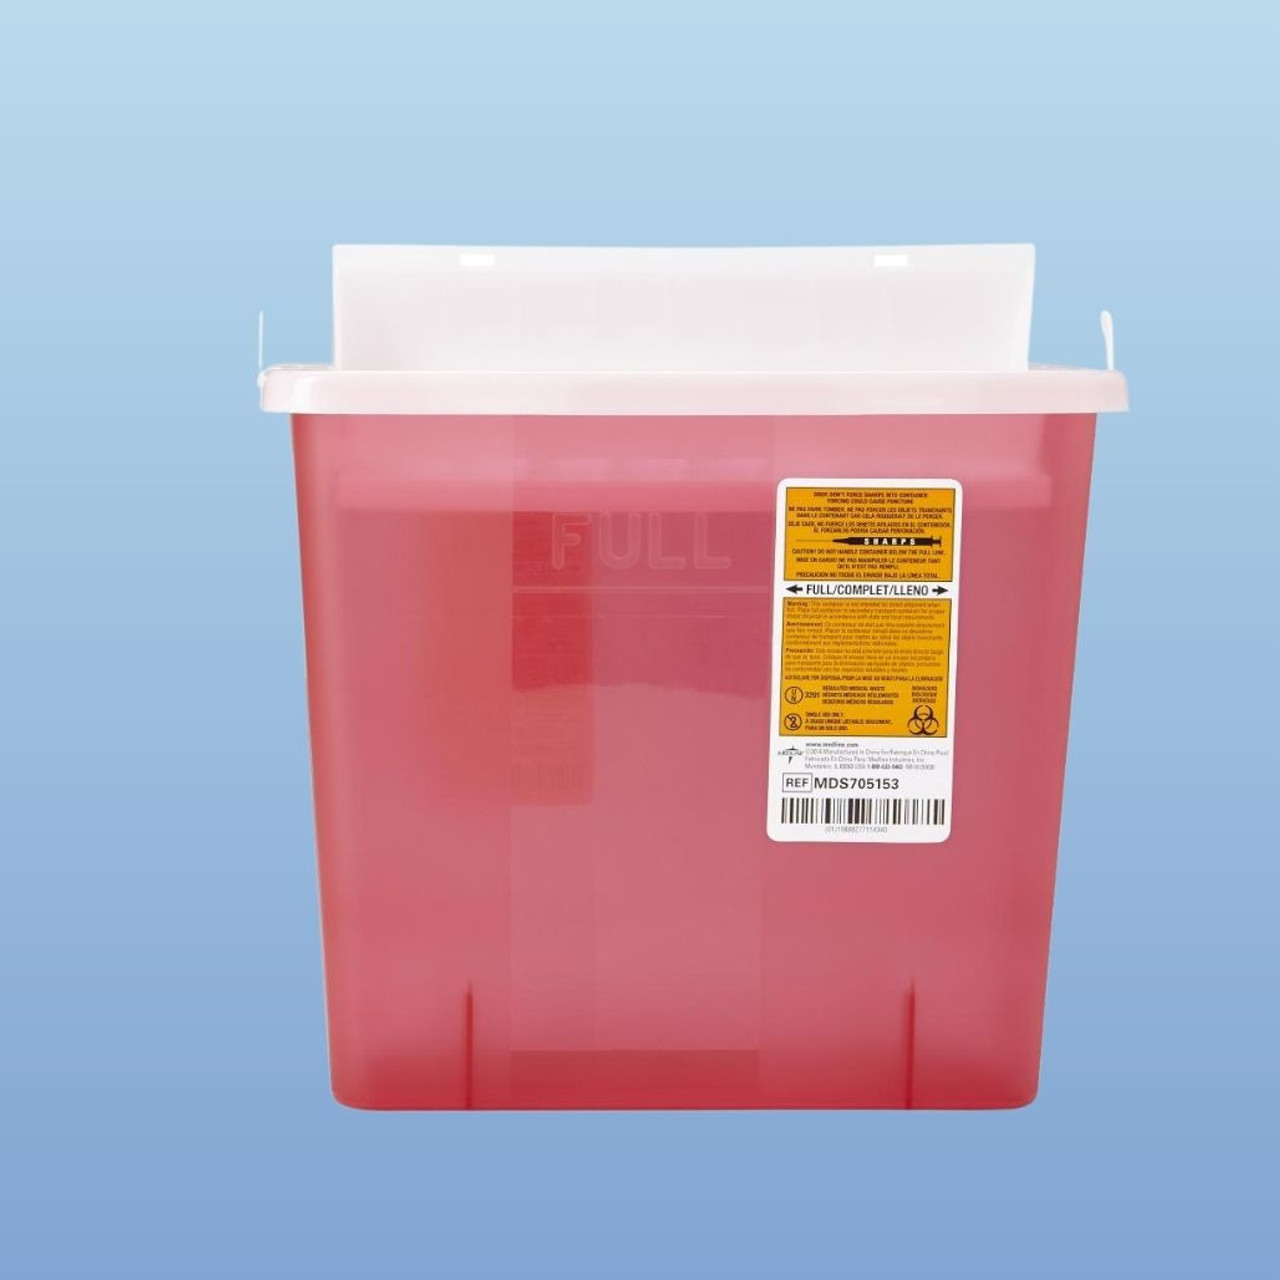 https://cdn11.bigcommerce.com/s-sb8f5ei7ew/images/stencil/1280x1280/products/9333/26507/medline-patient-room-sharps-containers-red-1-3-gallons__82315.1668806148.jpg?c=2